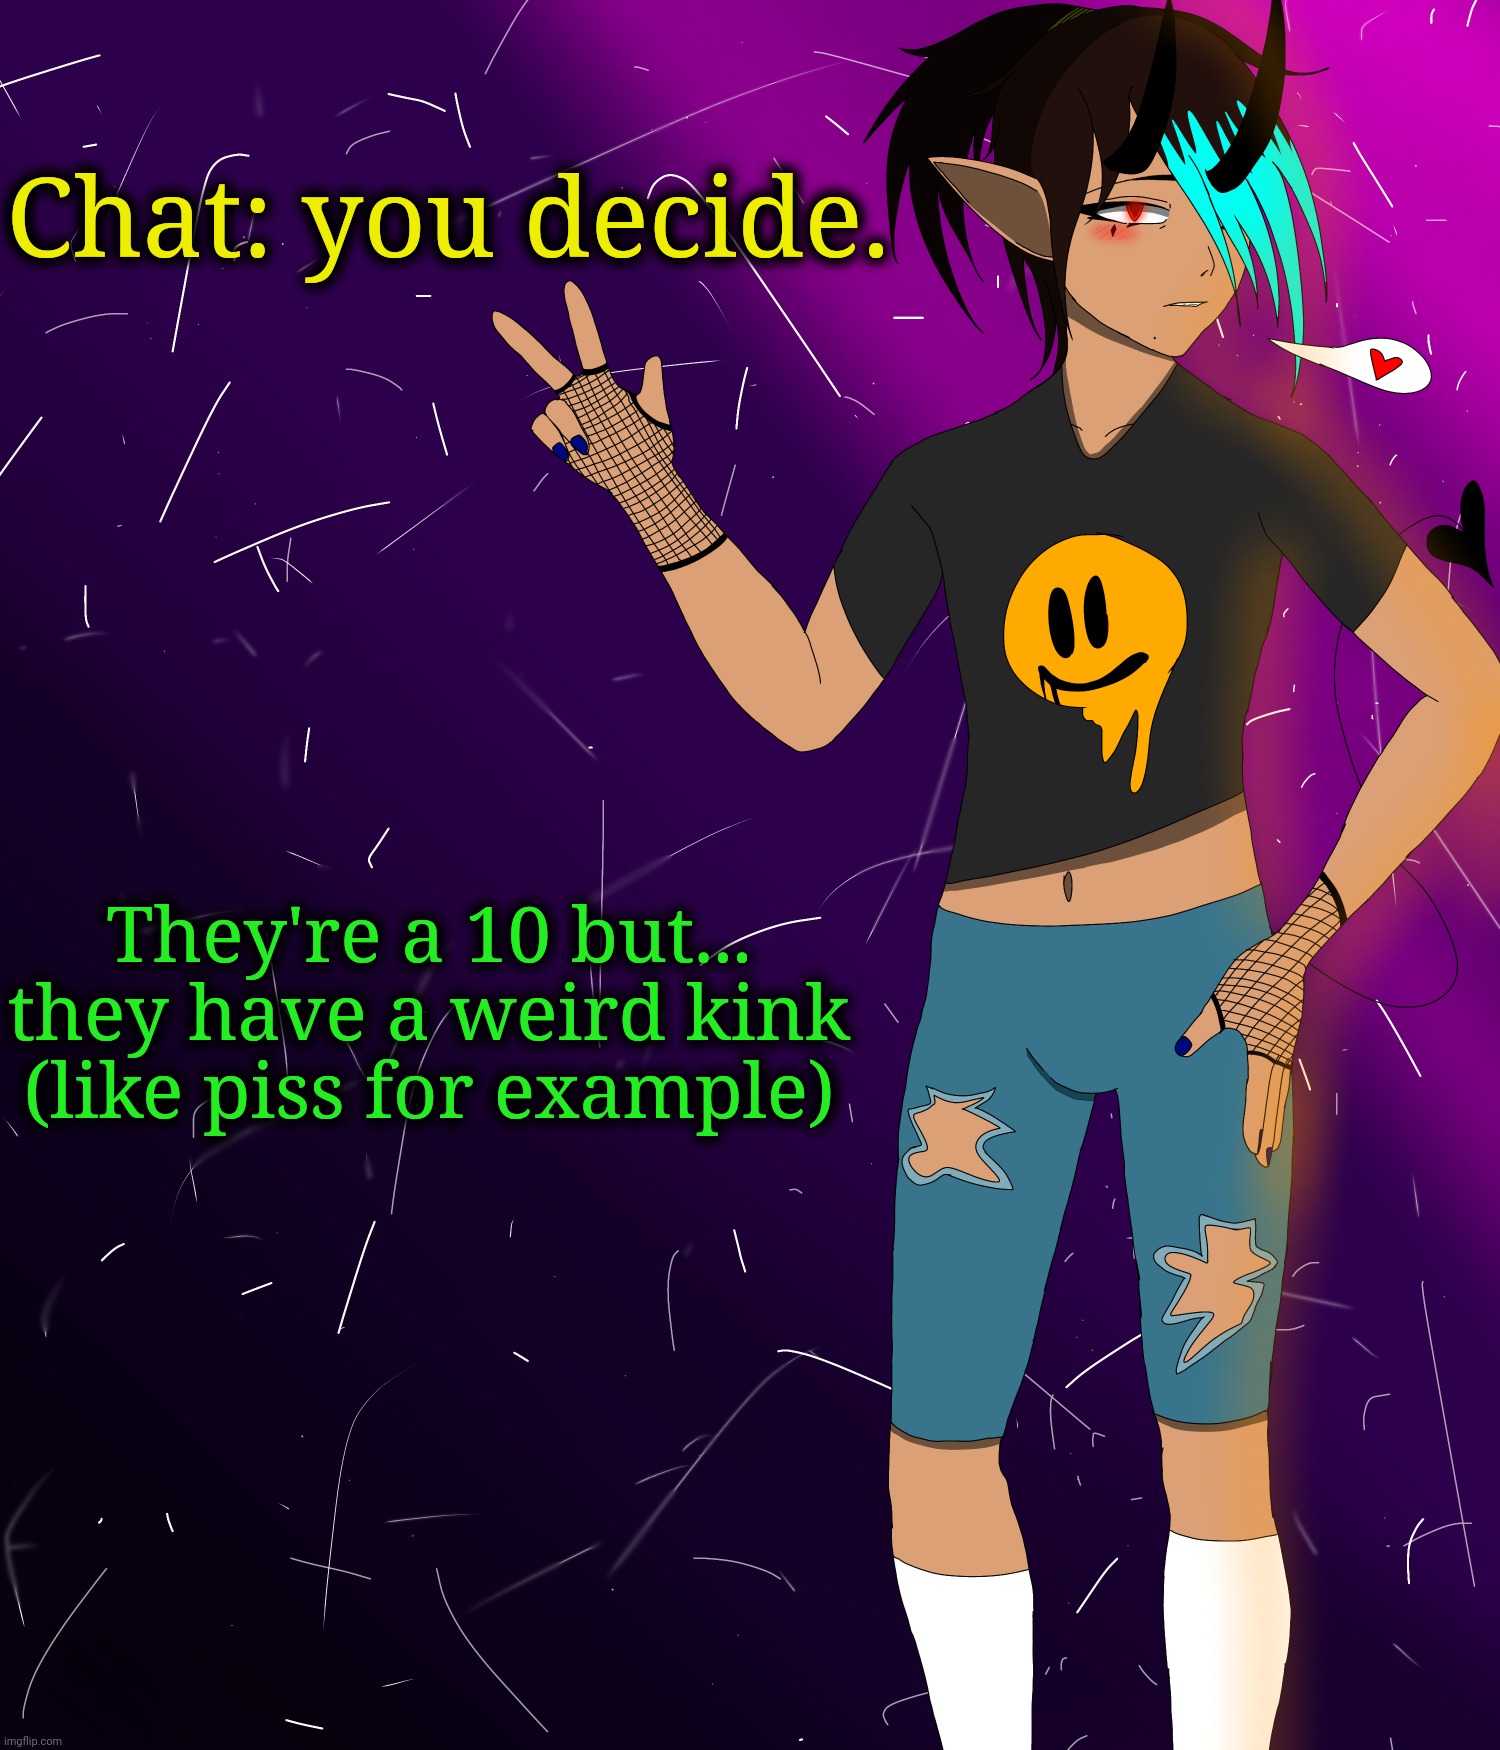 Spire jus chillin I guess | Chat: you decide. They're a 10 but... they have a weird kink (like piss for example) | image tagged in spire jus chillin i guess | made w/ Imgflip meme maker